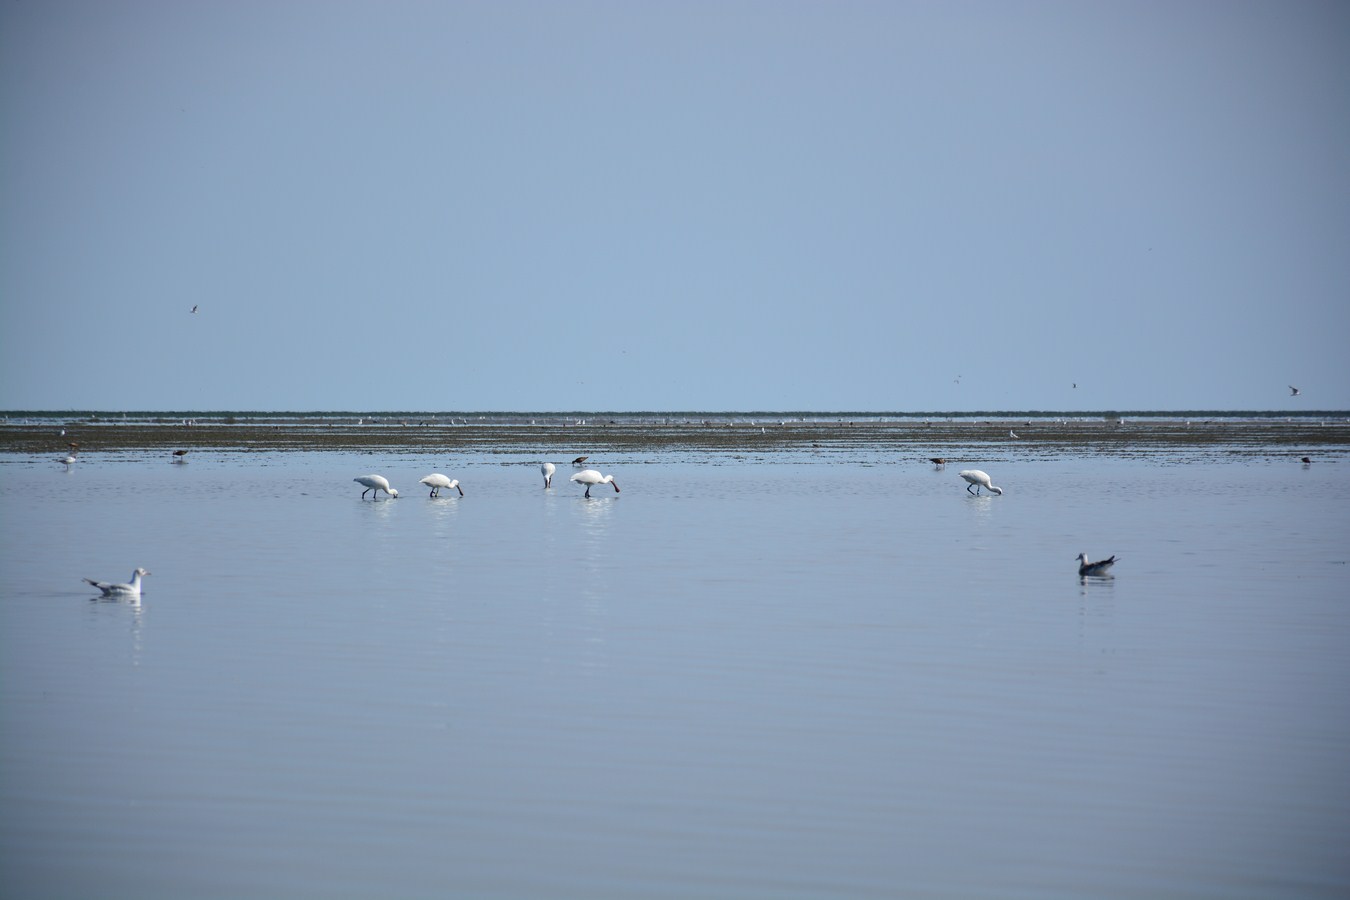 swans and seagulls wader across the calm waters